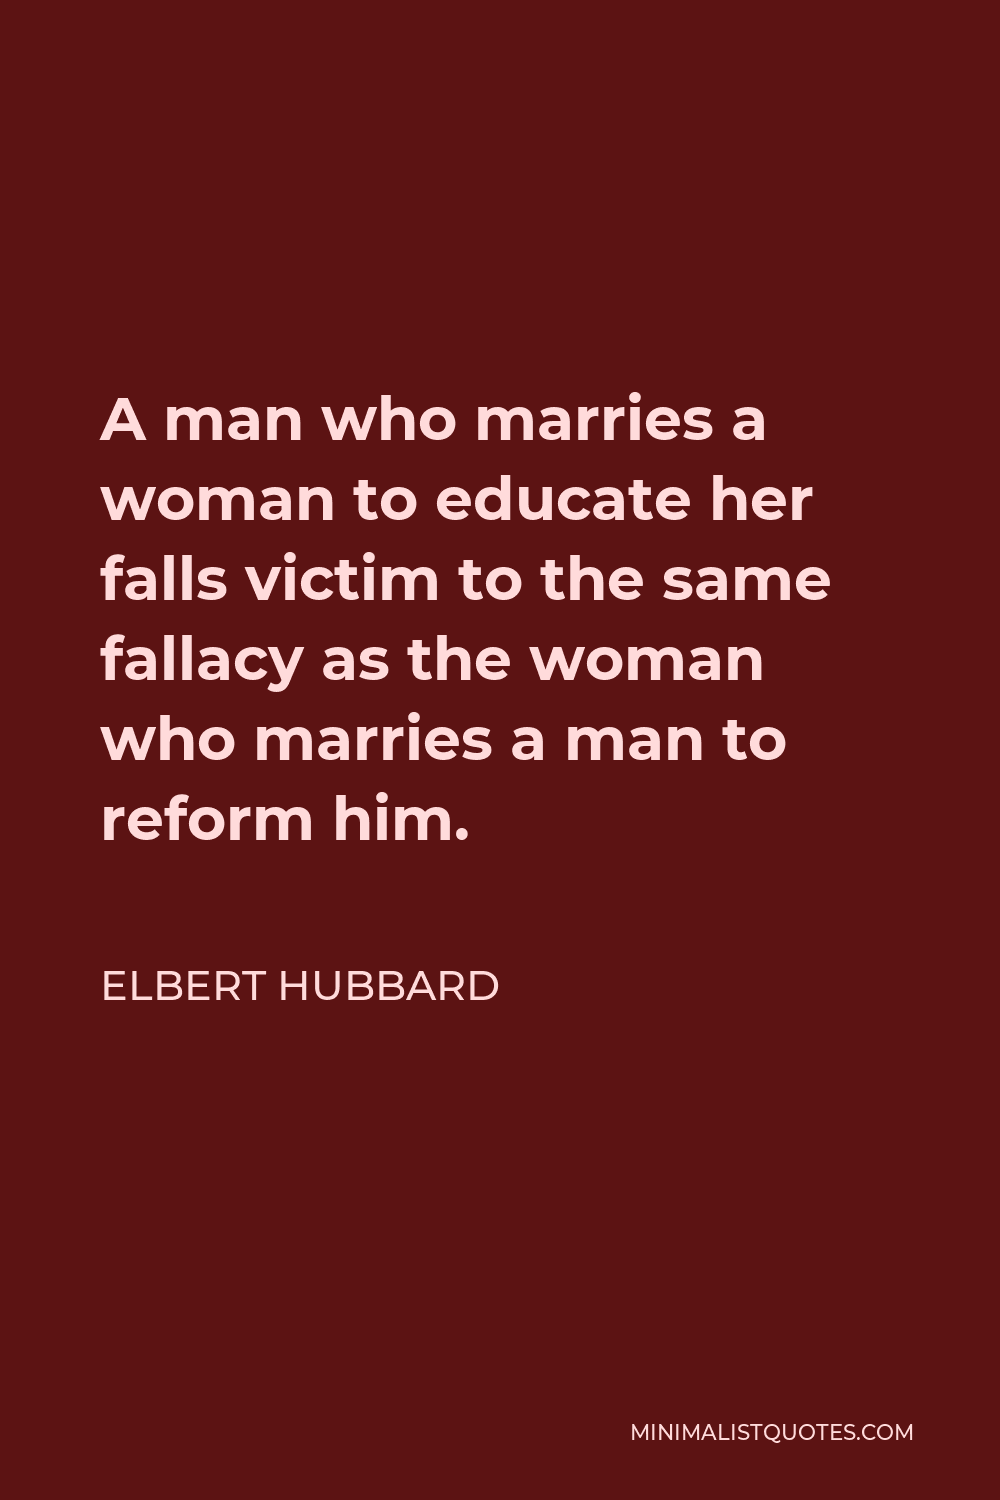 Elbert Hubbard Quote - A man who marries a woman to educate her falls victim to the same fallacy as the woman who marries a man to reform him.